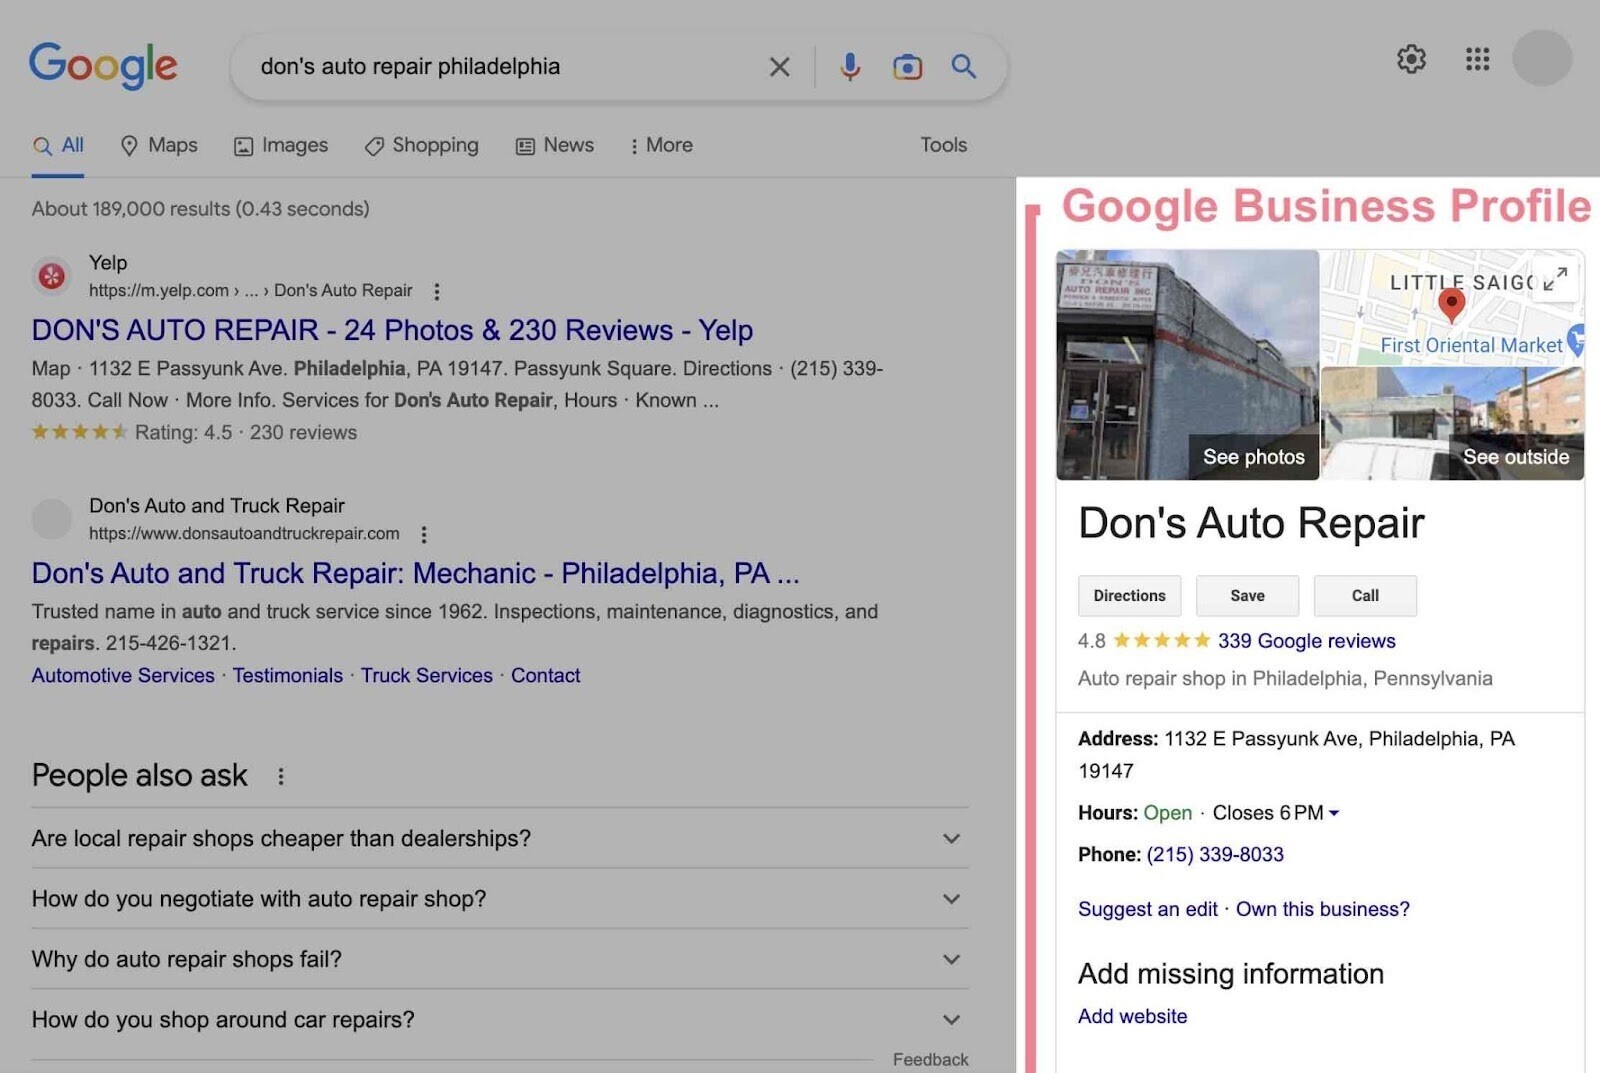 Business Profile in SERP